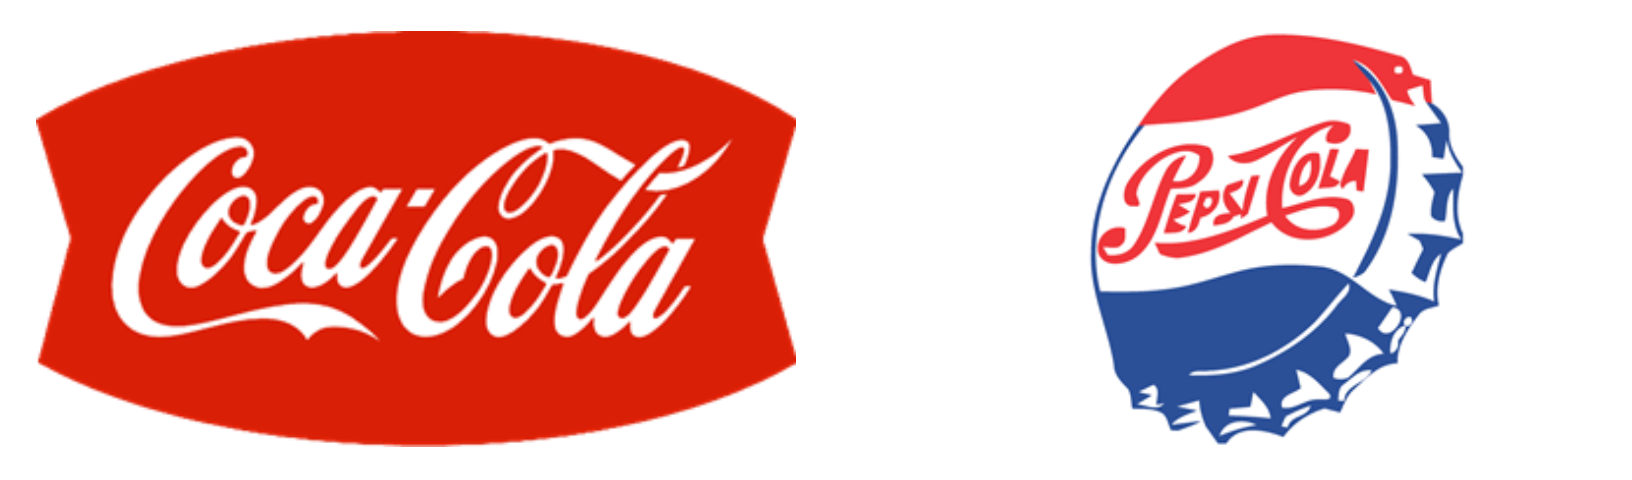 Coca-Cola and Pepsi-Cola logos in the 50s